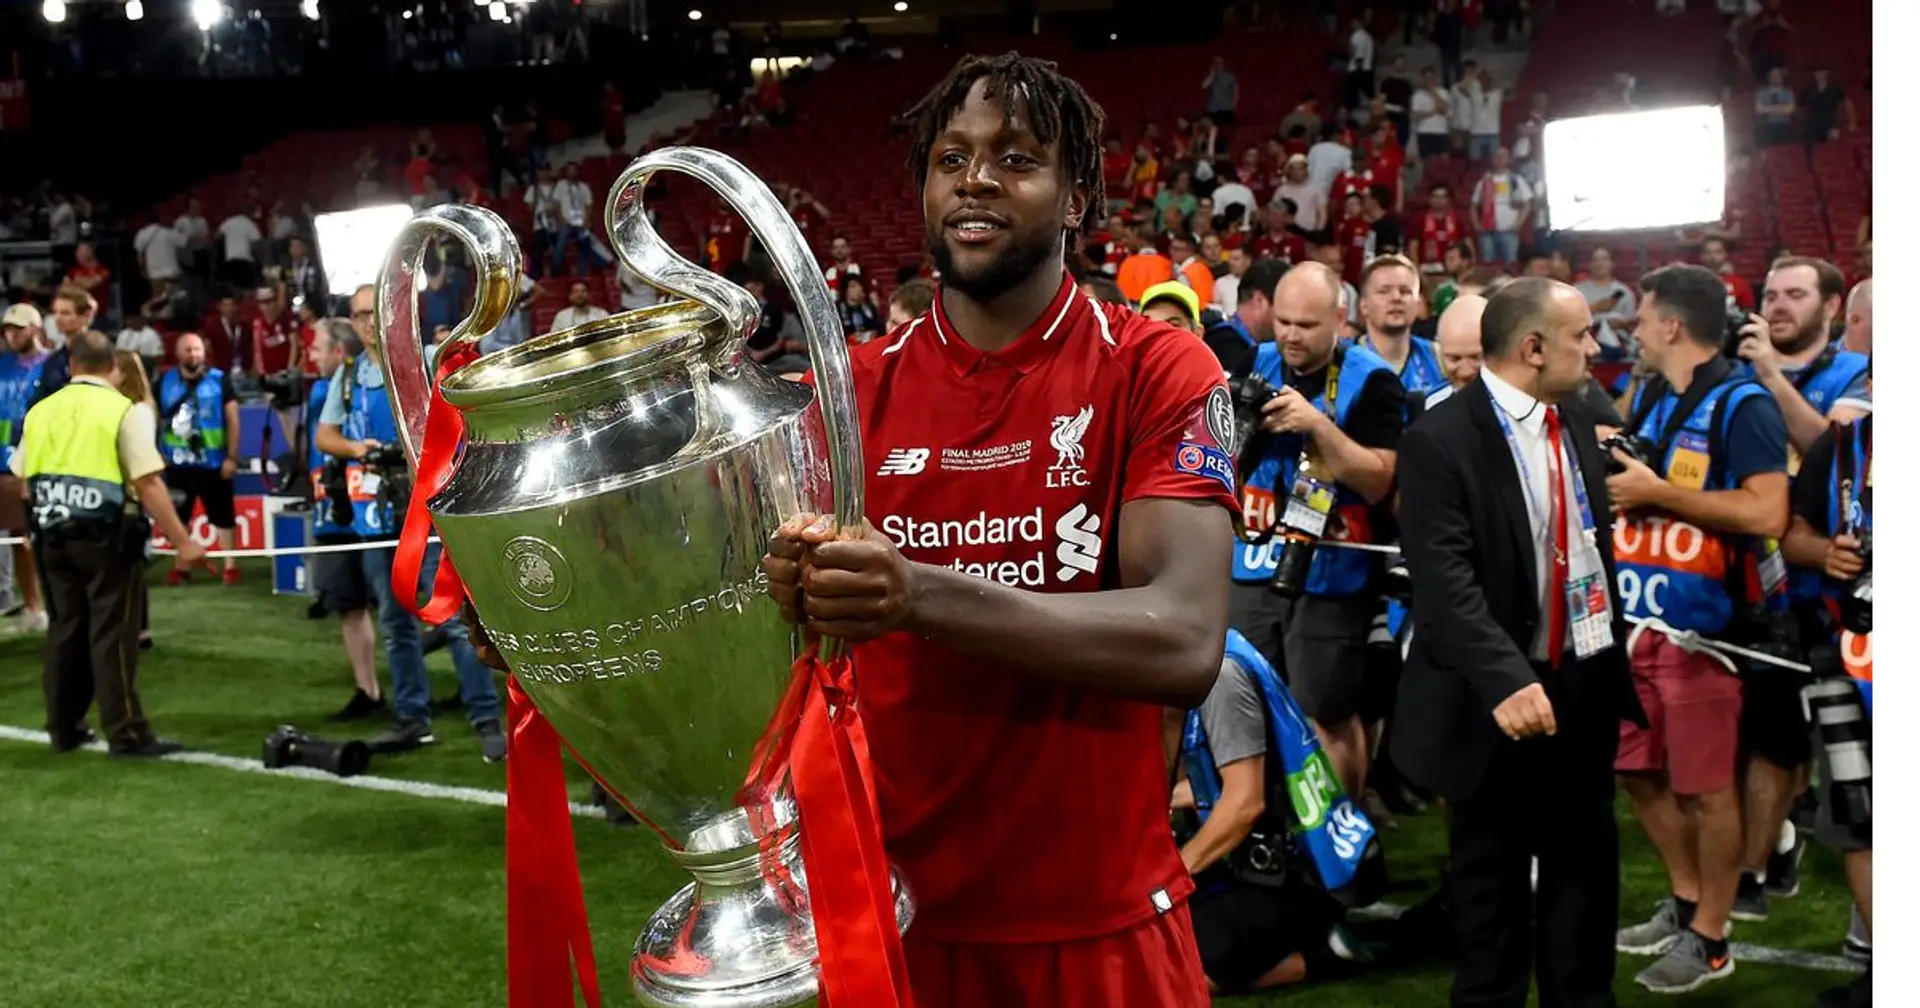 Corner taken quickly and more: Origi's best moments at Anfield as he leaves for Milan - Klopp calls him a legend (video)